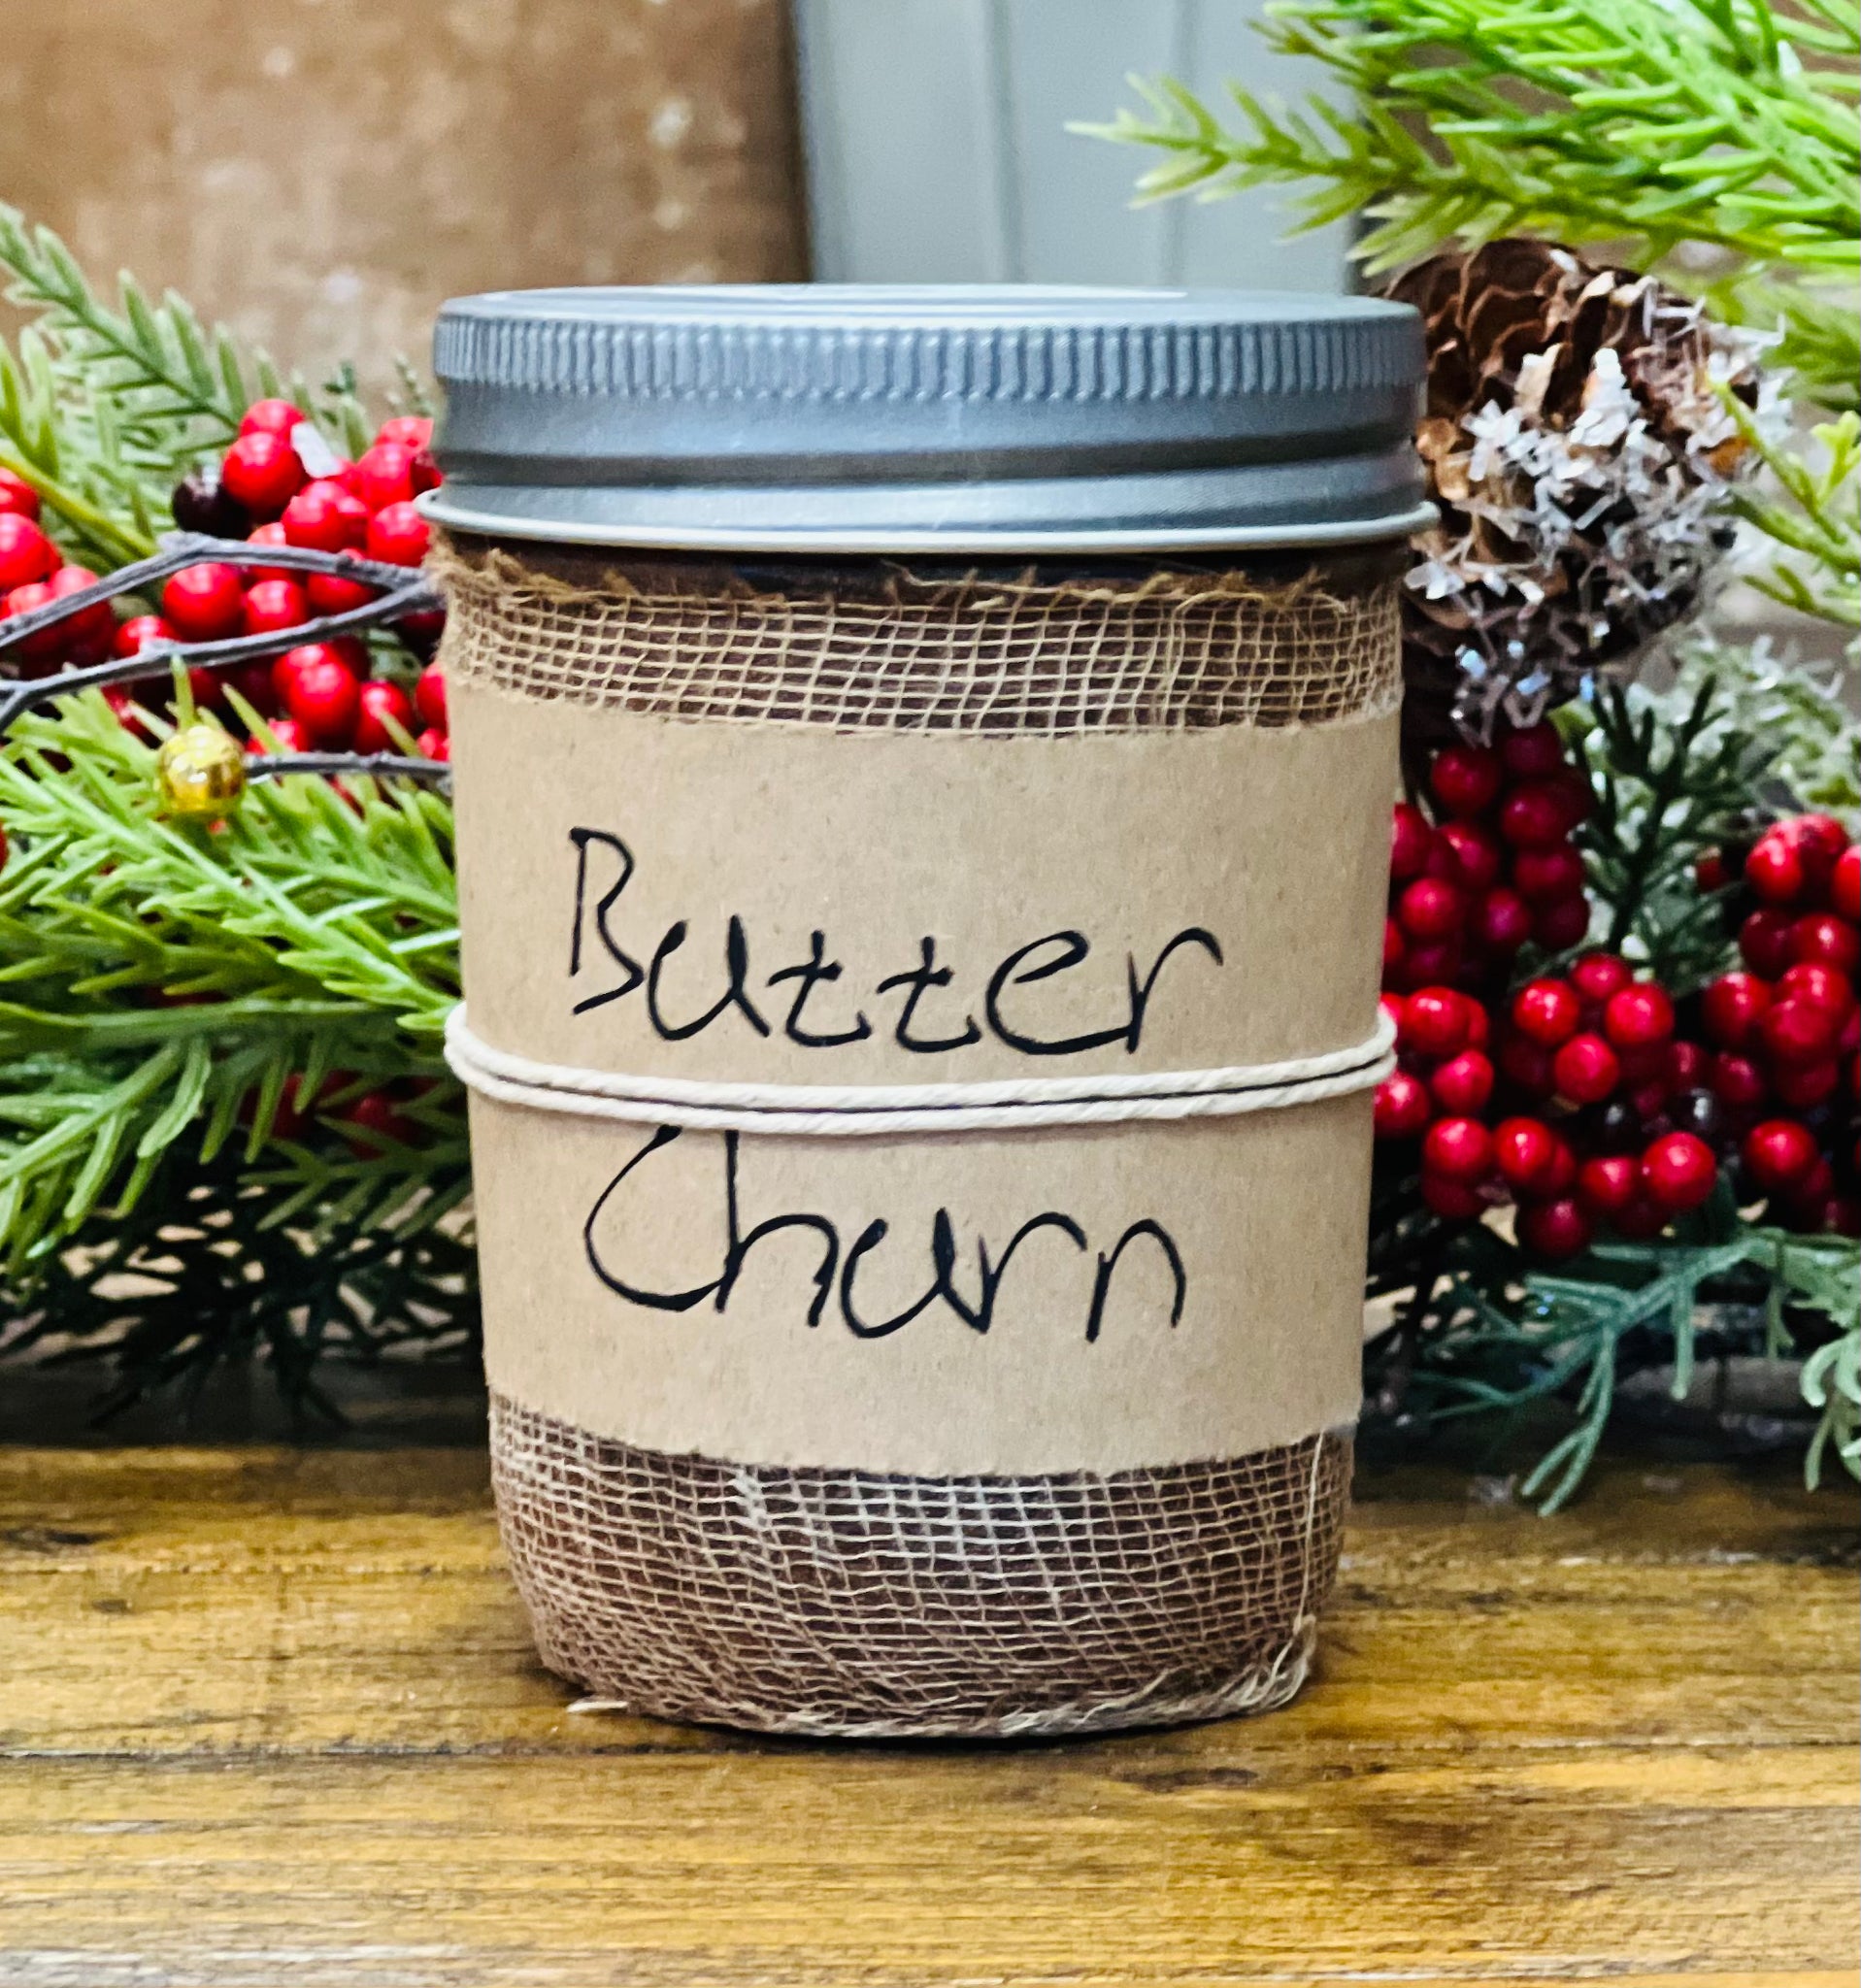 Black Crow Candles- Butter Churn